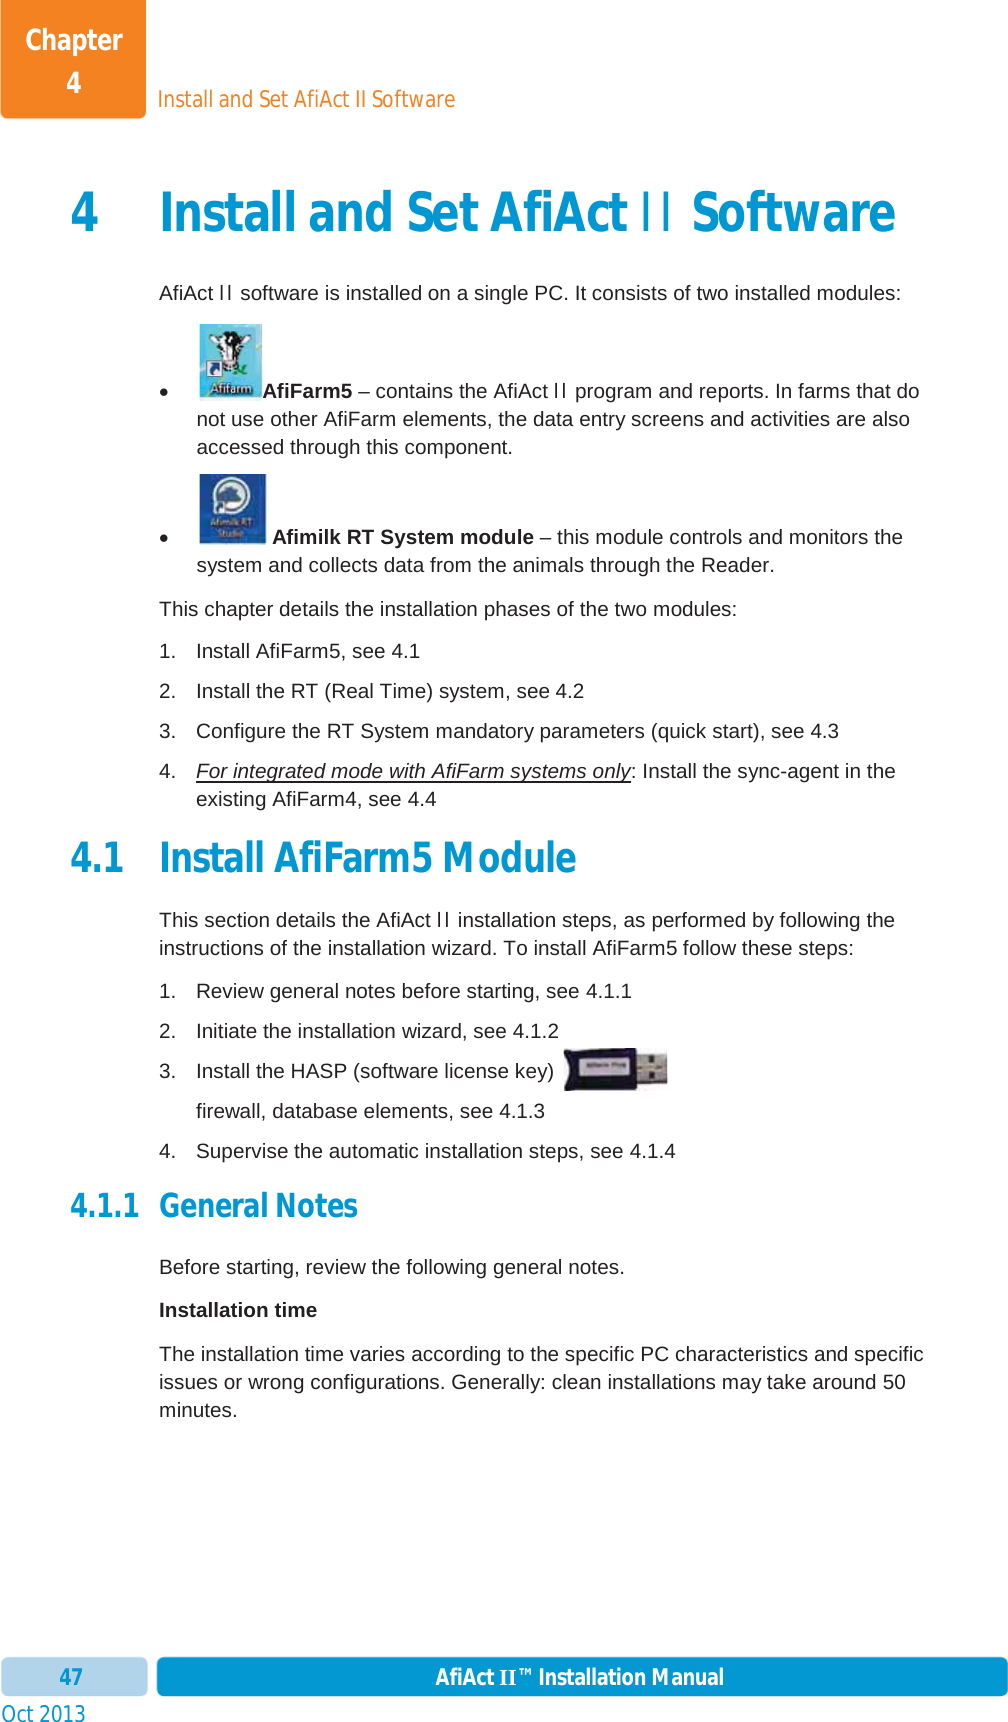 Install and Set AfiAct II SoftwareChapter 4Oct 2013 AfiAct II™ Installation Manual474 Install and Set AfiAct II Software AfiAct II software is installed on a single PC. It consists of two installed modules: xAfiFarm5 – contains the AfiAct II program and reports. In farms that do not use other AfiFarm elements, the data entry screens and activities are also accessed through this component.  x Afimilk RT System module – this module controls and monitors the system and collects data from the animals through the Reader.  This chapter details the installation phases of the two modules: 1.  Install AfiFarm5, see  4.1 2.  Install the RT (Real Time) system, see  4.2 3.  Configure the RT System mandatory parameters (quick start), see  4.3 4.  For integrated mode with AfiFarm systems only: Install the sync-agent in the existing AfiFarm4, see 4.44.1 Install AfiFarm5 Module This section details the AfiAct II installation steps, as performed by following the instructions of the installation wizard. To install AfiFarm5 follow these steps: 1.  Review general notes before starting, see  4.1.1 2.  Initiate the installation wizard, see  4.1.2 3.  Install the HASP (software license key)  firewall, database elements, see  4.1.3 4.  Supervise the automatic installation steps, see  4.1.4 4.1.1 General Notes Before starting, review the following general notes. Installation time The installation time varies according to the specific PC characteristics and specific issues or wrong configurations. Generally: clean installations may take around 50 minutes.  